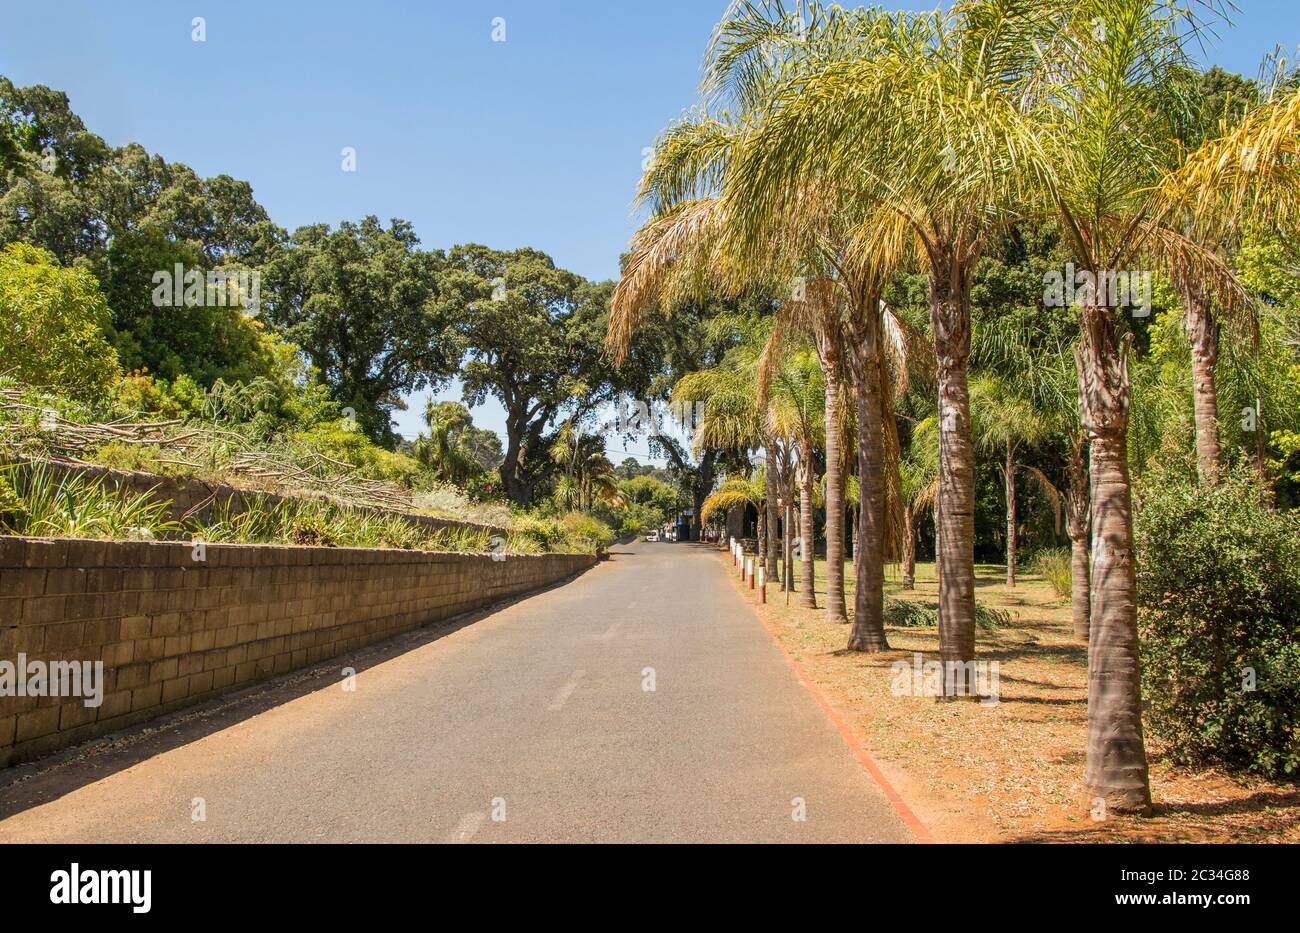 South African street with palm trees, palm al Cape Town, South Africa. Stock Photo